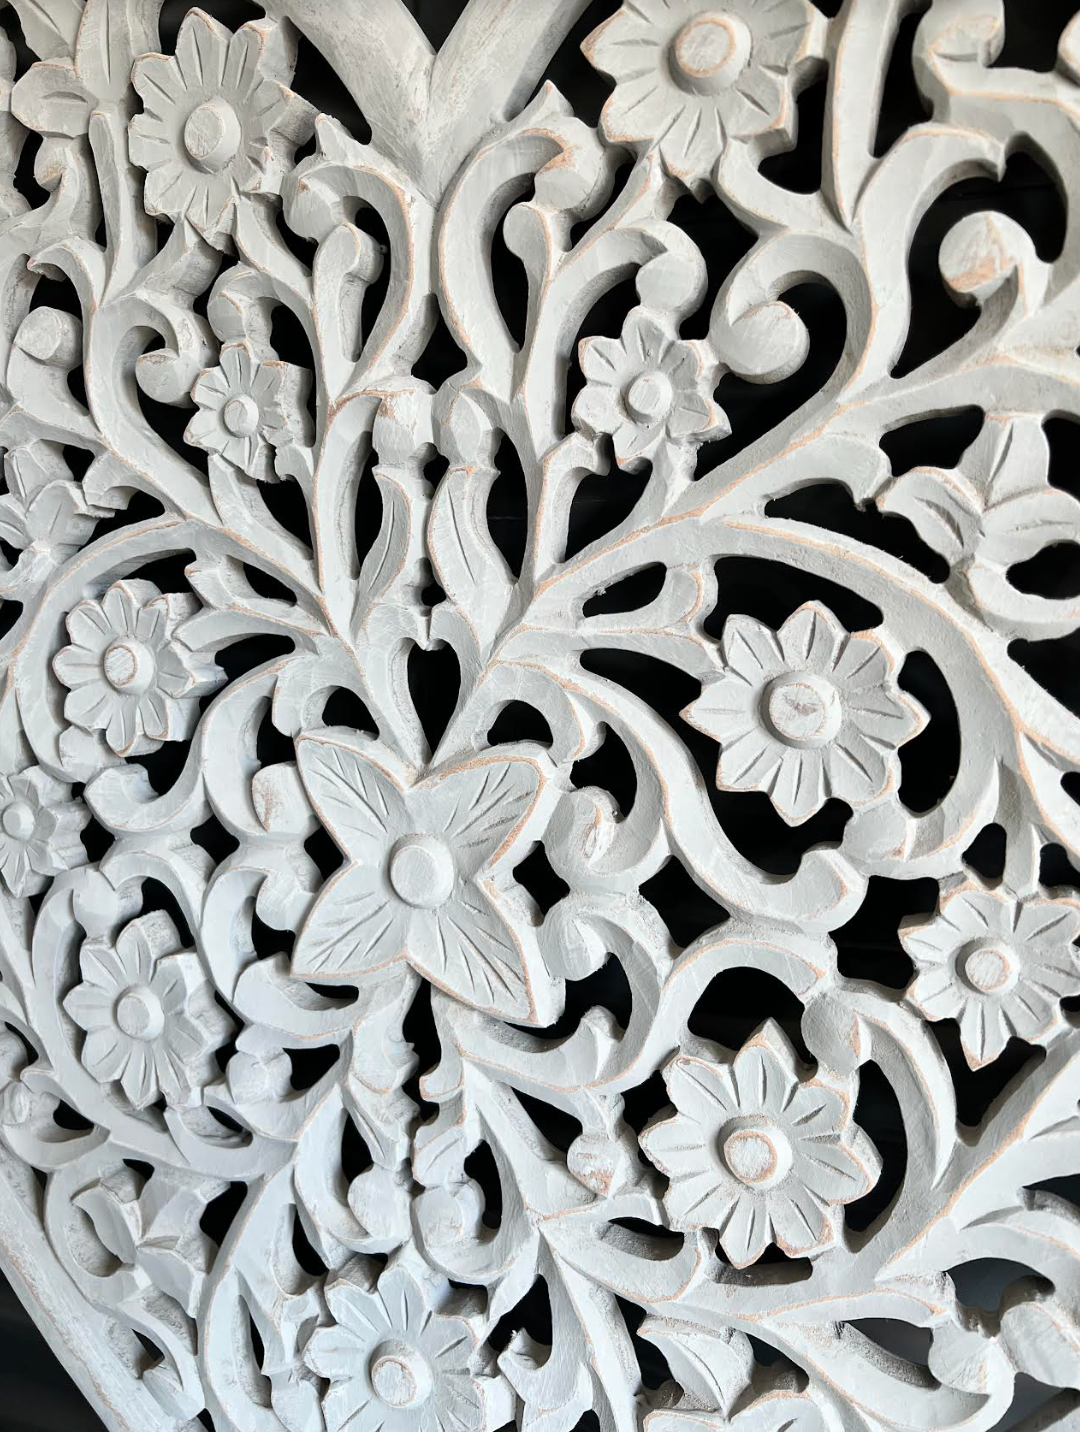 Heart GREY Carved Panel